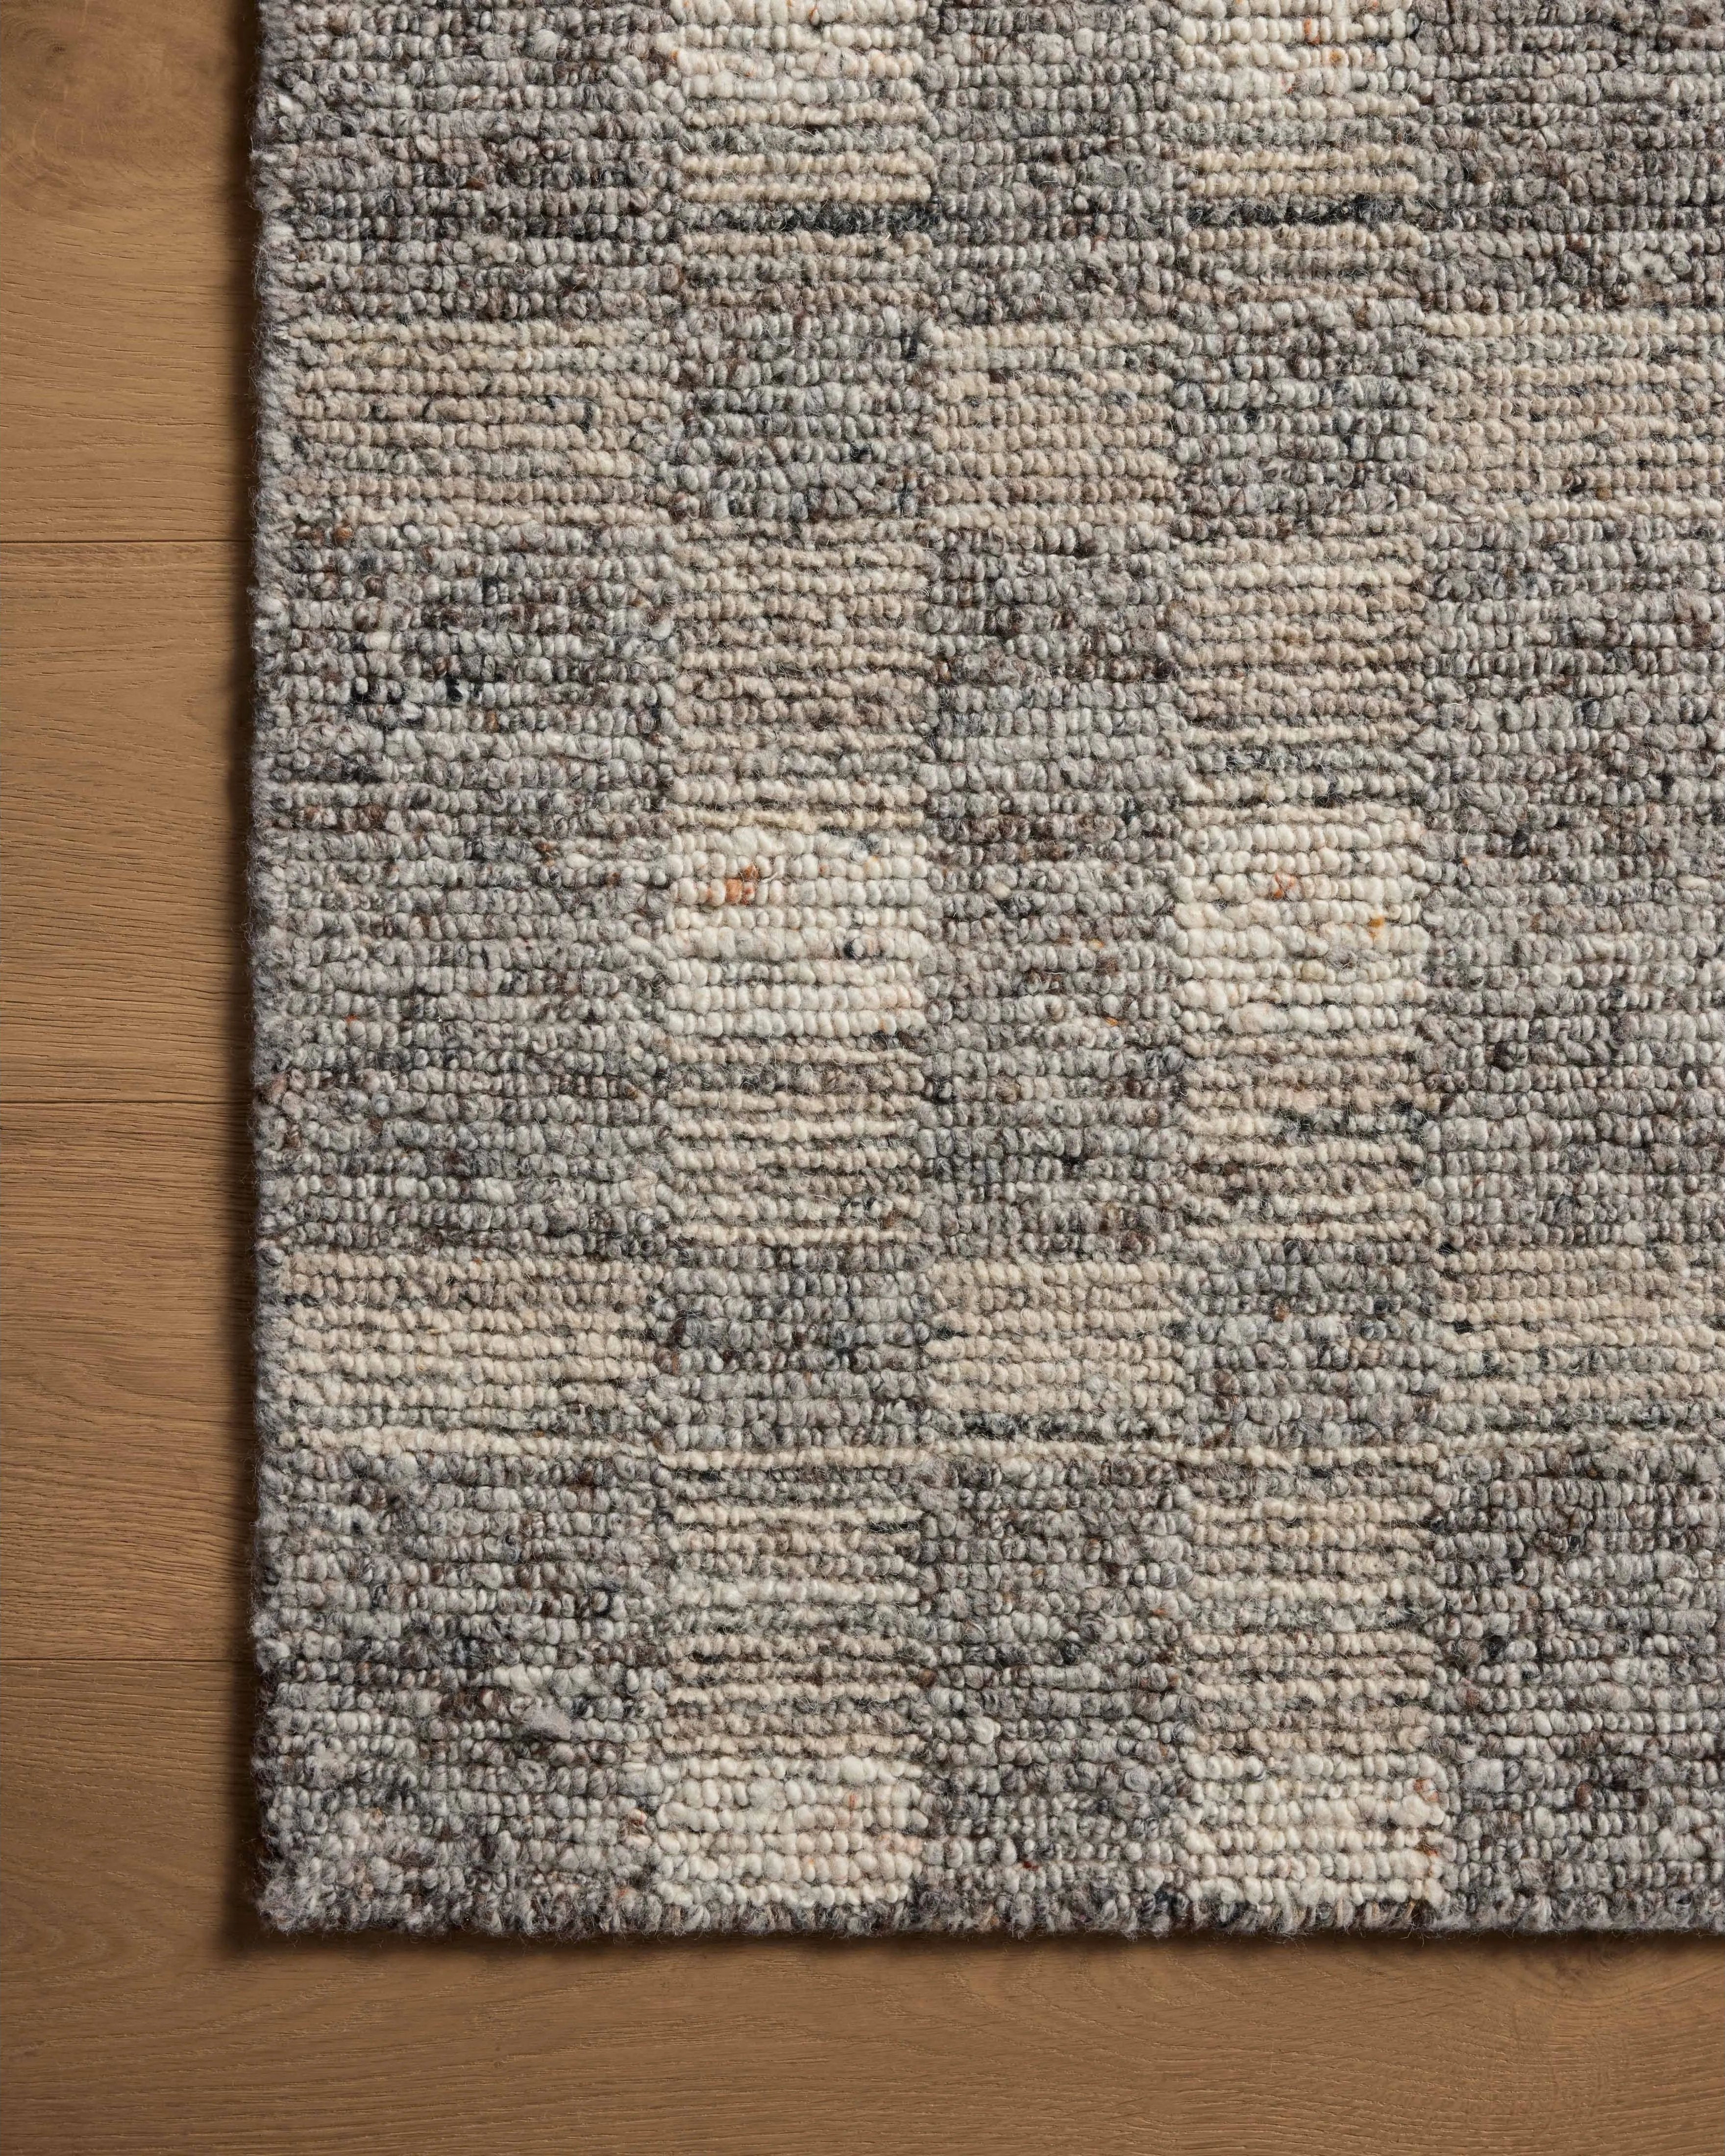 The Sonya Stone / Natural Rug is a hand-loomed area rug with a light, airy palette and understated graphic design. The rug’s textural pile is a soft blend of wool and nylon that creates dimension in living rooms, bedrooms, and more. Amethyst Home provides interior design, new home construction design consulting, vintage area rugs, and lighting in the Tampa metro area.